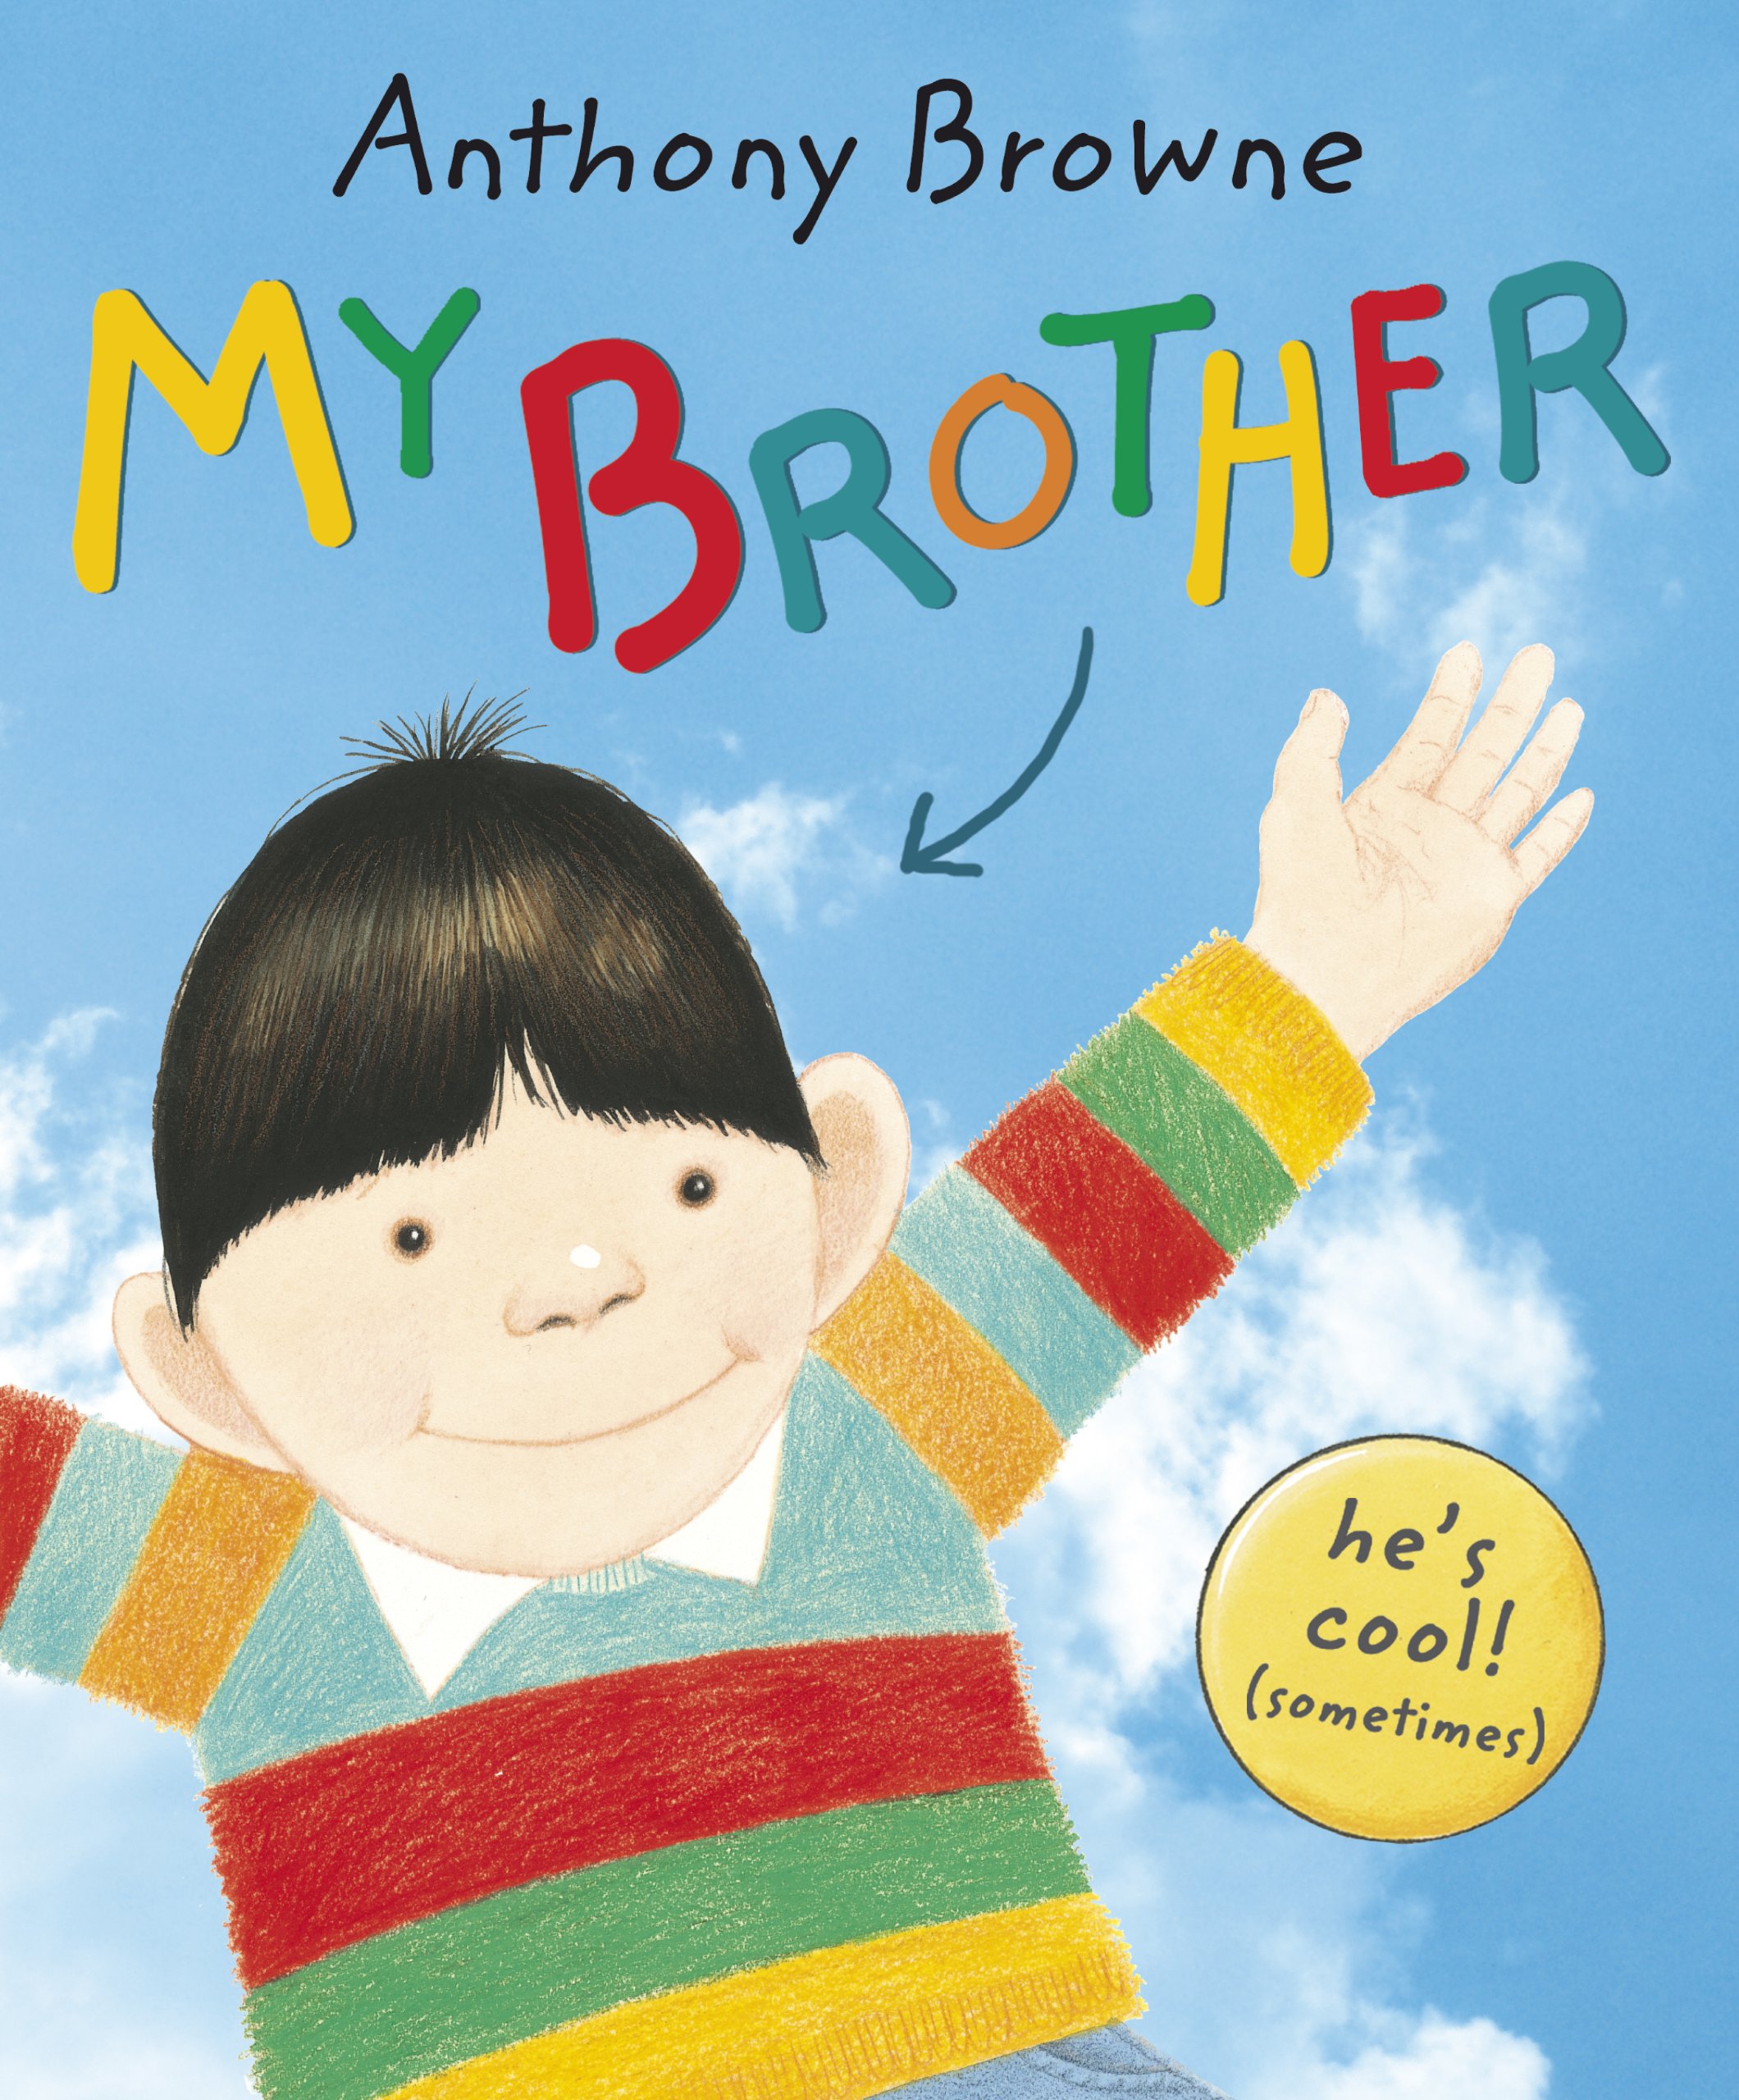 Amazon.fr - My Brother - Browne, Anthony - Livres